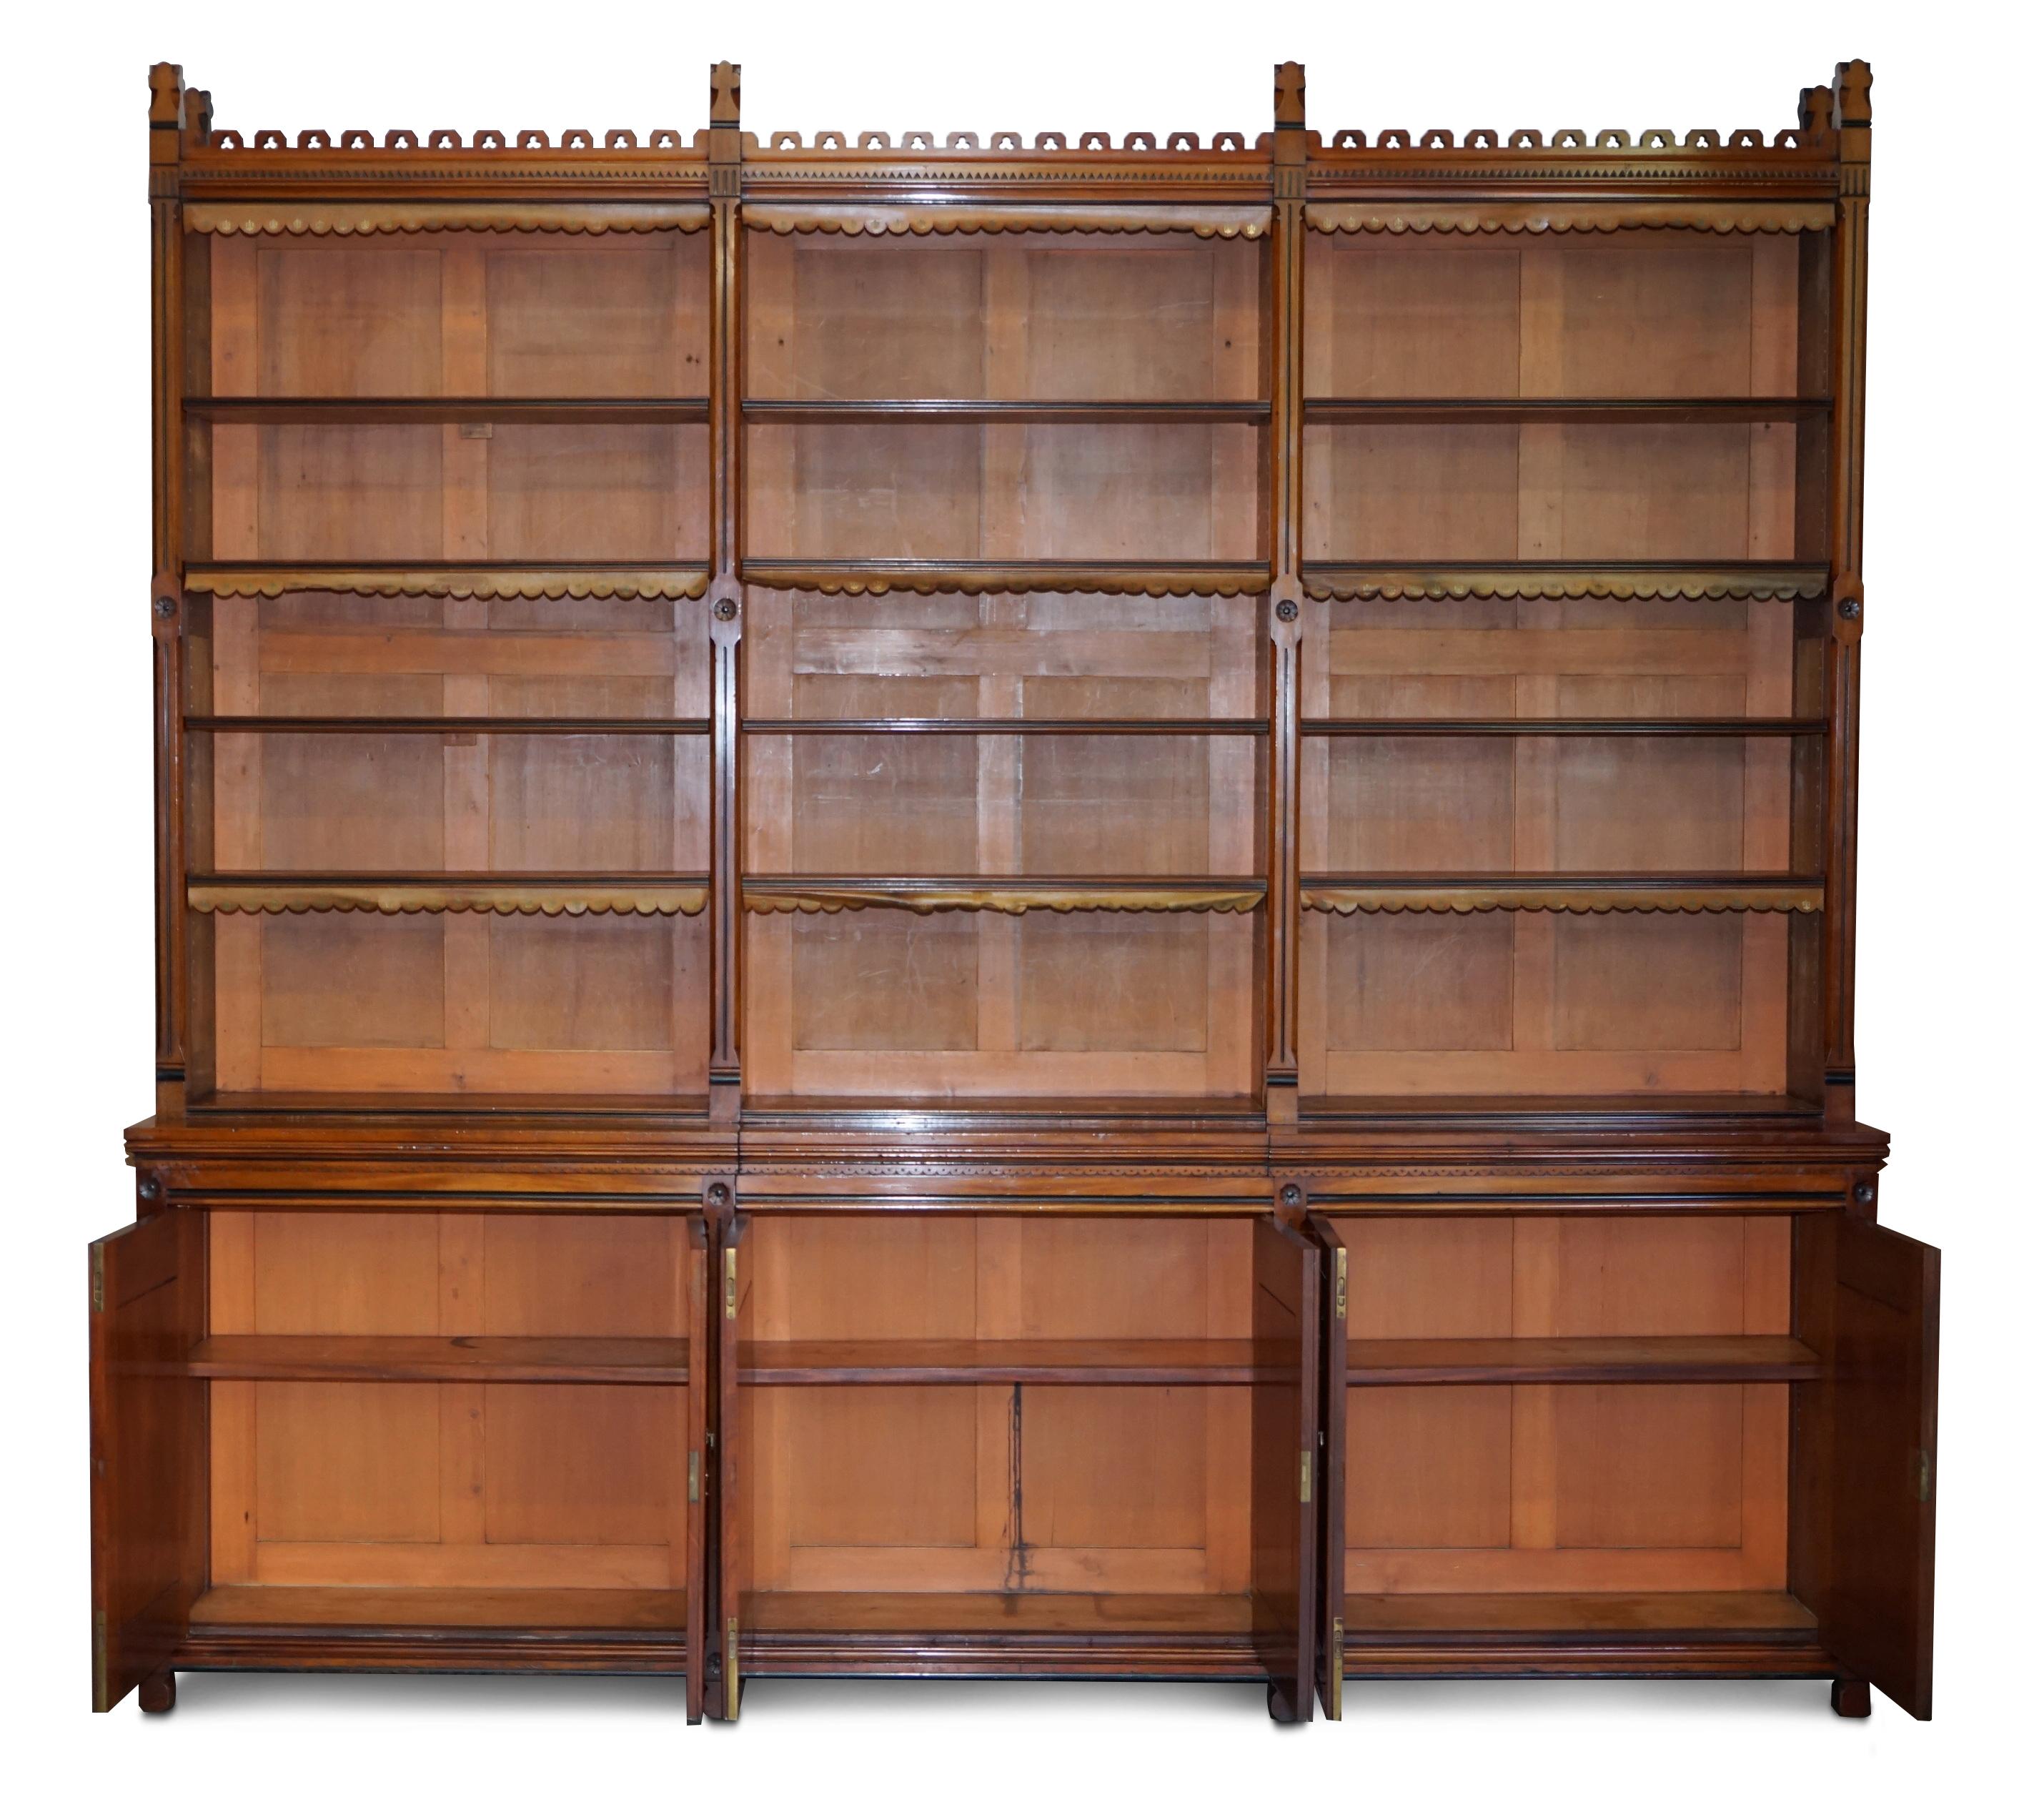 gothic revival bookcase